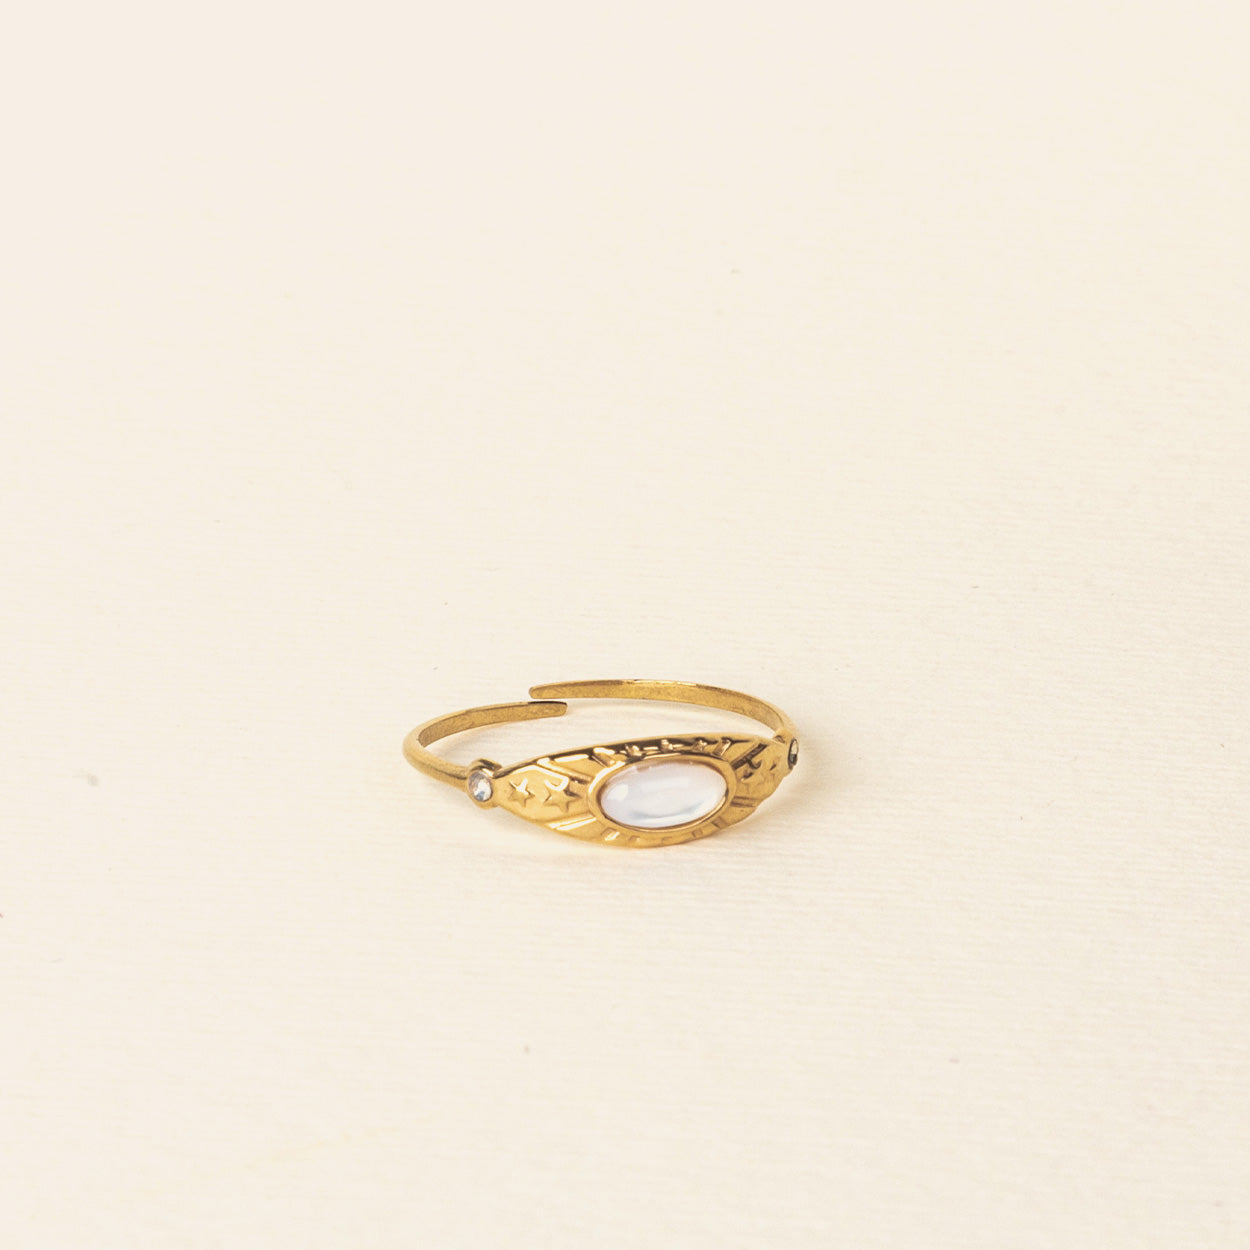 Image of the Celestial Ring, adorned with a luminous Mother of Pearl centerpiece and 18K Gold Plated Stainless Steel. A singularly exquisite piece, sure to never fade nor tarnish, and resilient to water.